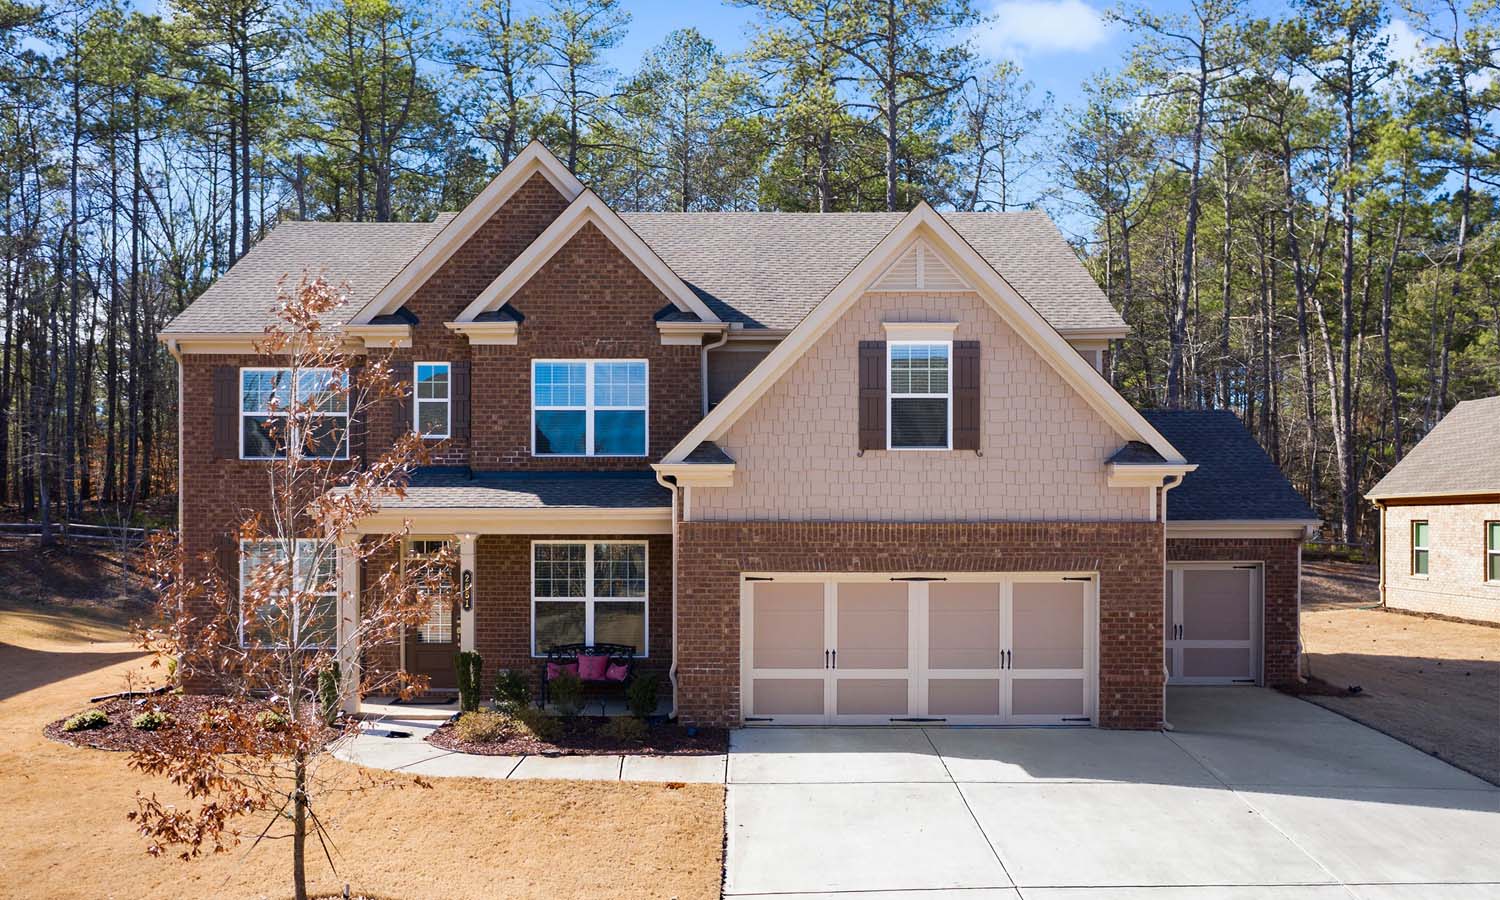 2651 Bartleson Dr, Kennesaw Ga 30152 - 5 Bedroom, 3 Bath Home in Brumbly Place - Keller Williams Realty Signature Partners